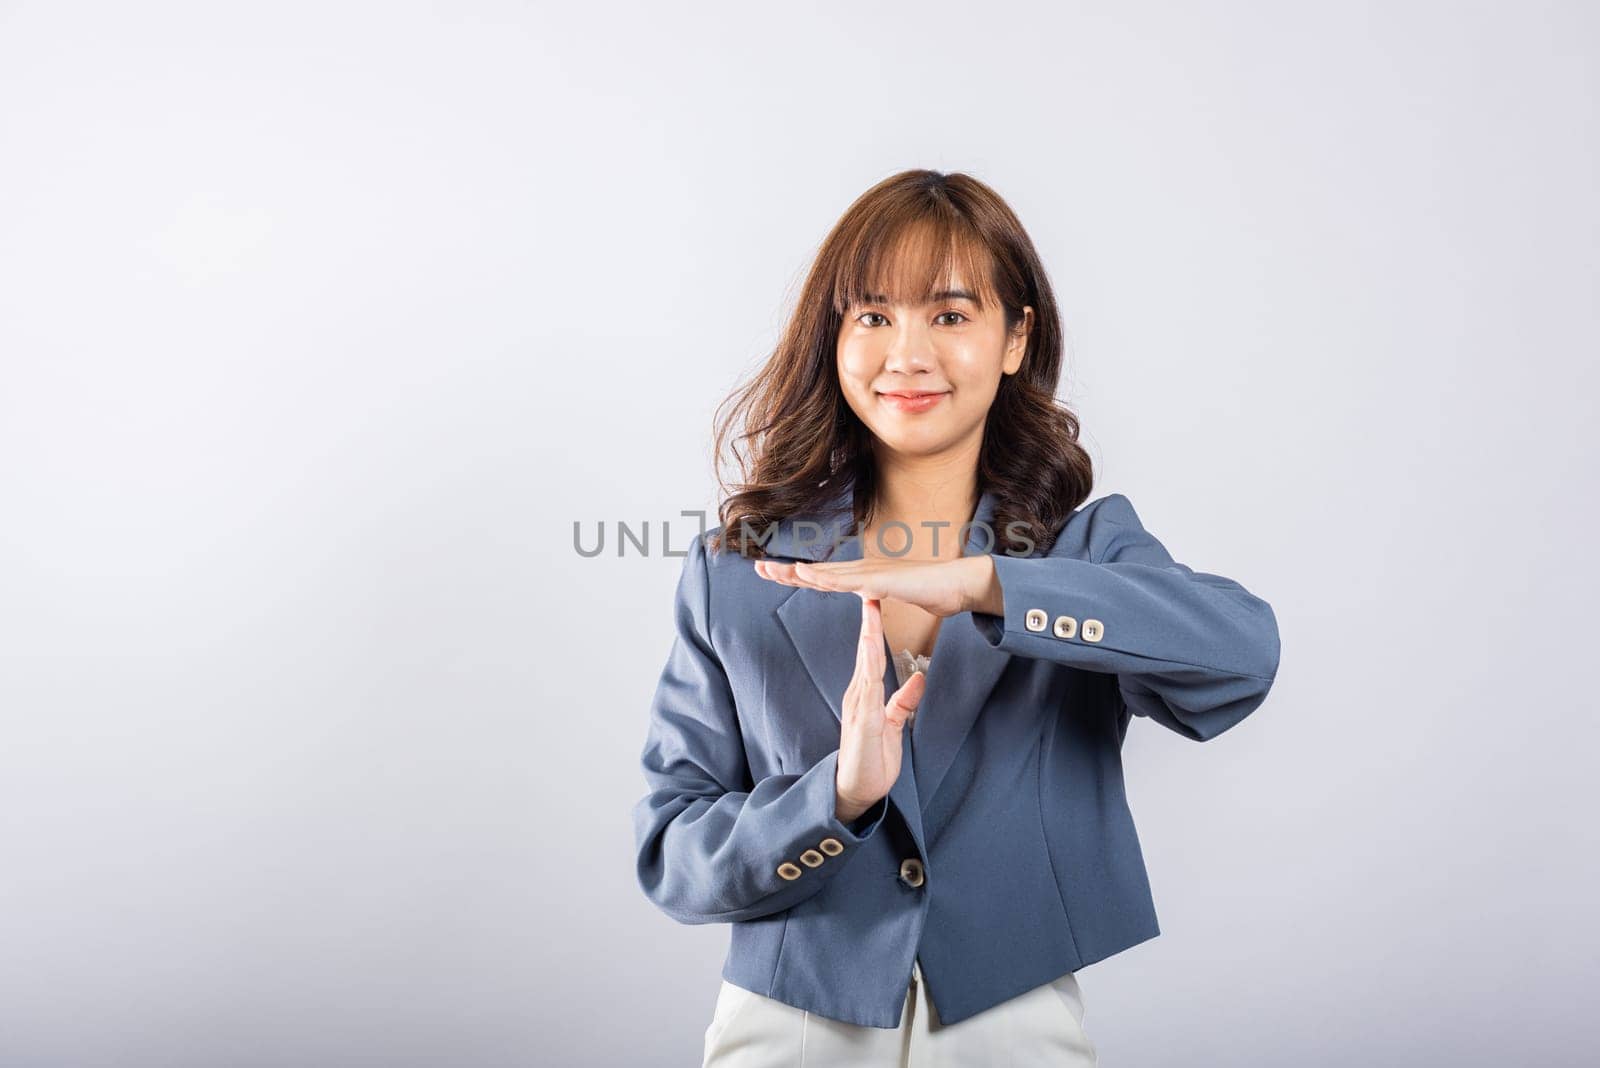 Closeup portrait young business woman wearing a suit smiling making time out gesture with hands studio shot isolated on white background, demonstrates break hand sign, stop time with copy space